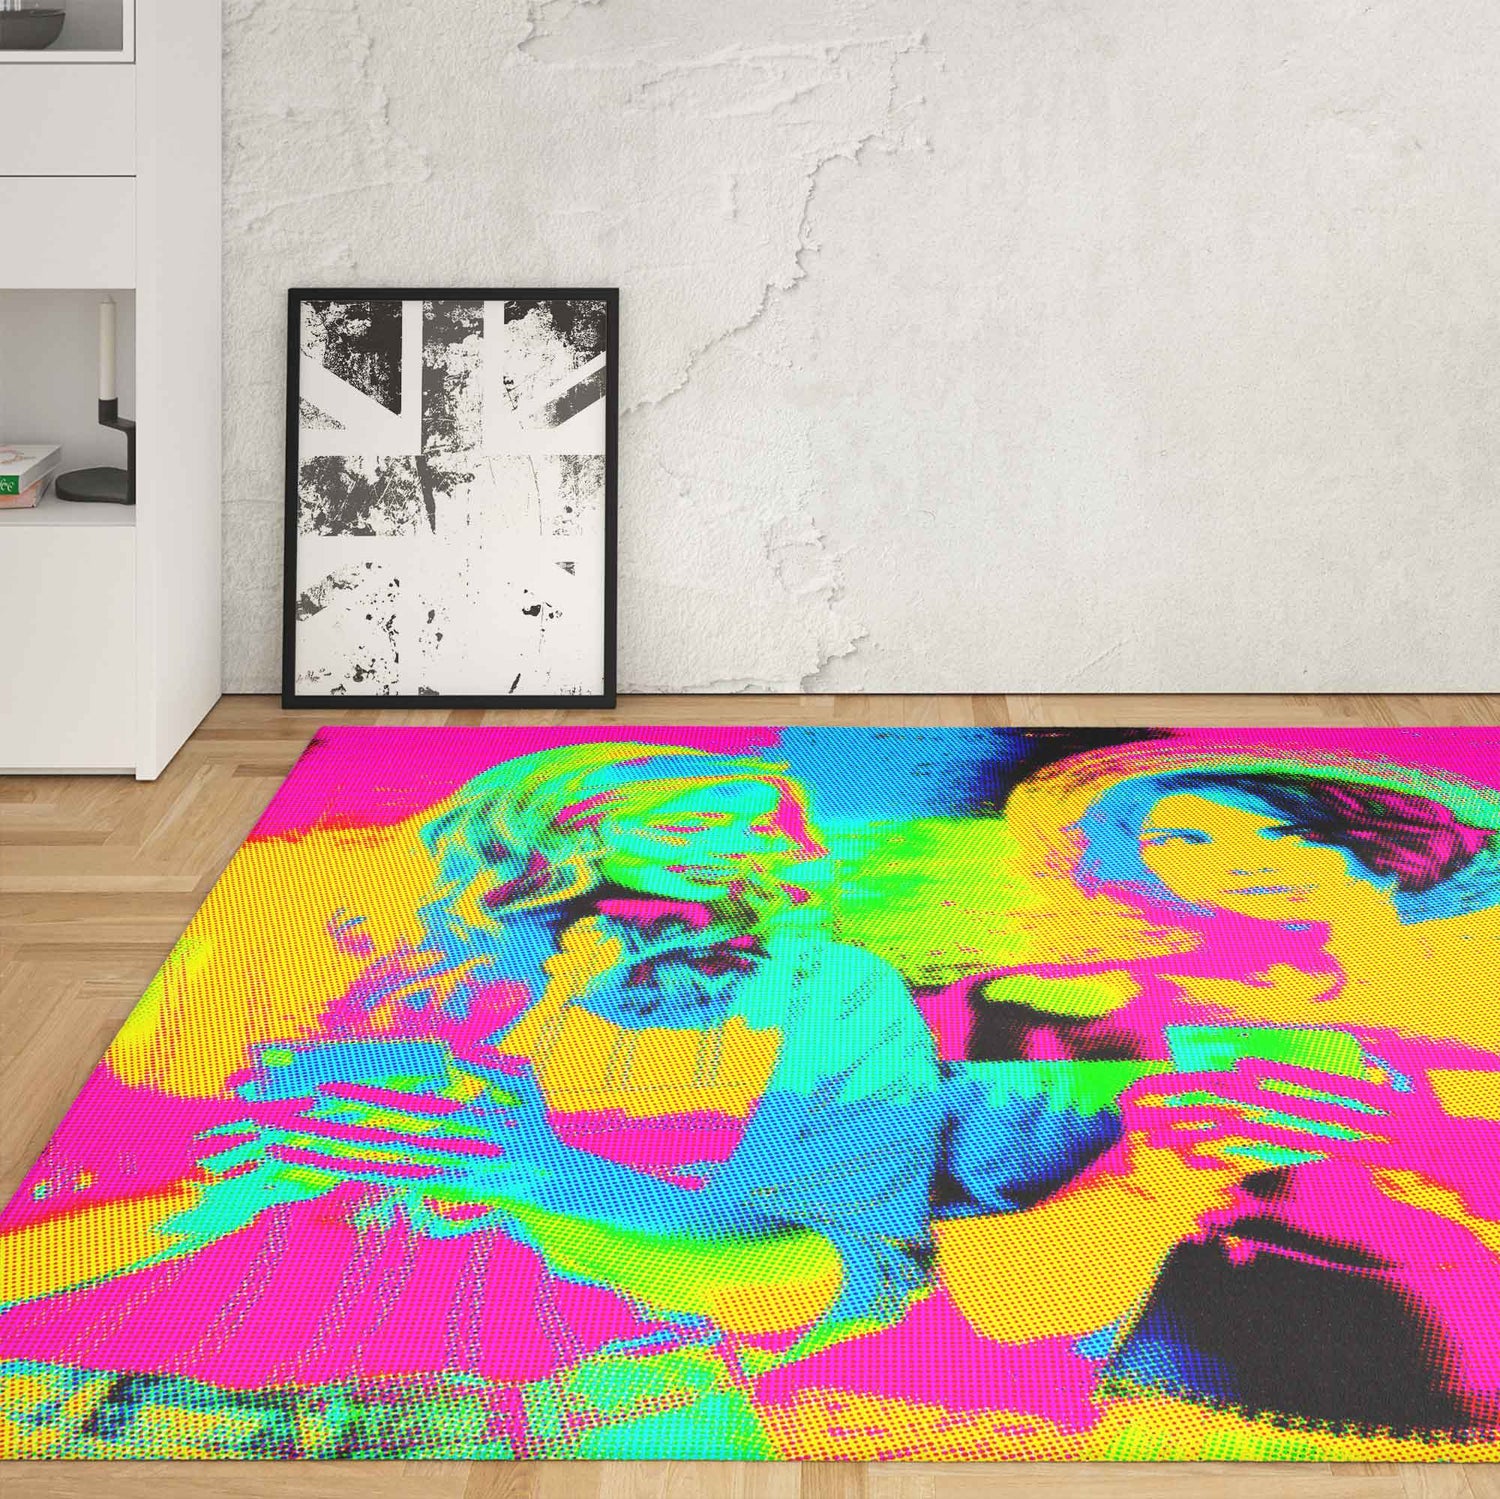 Experience the joy of customisation with our Personalised Photo Rug Carpet Mat collection. Transform your space with your own unique flair